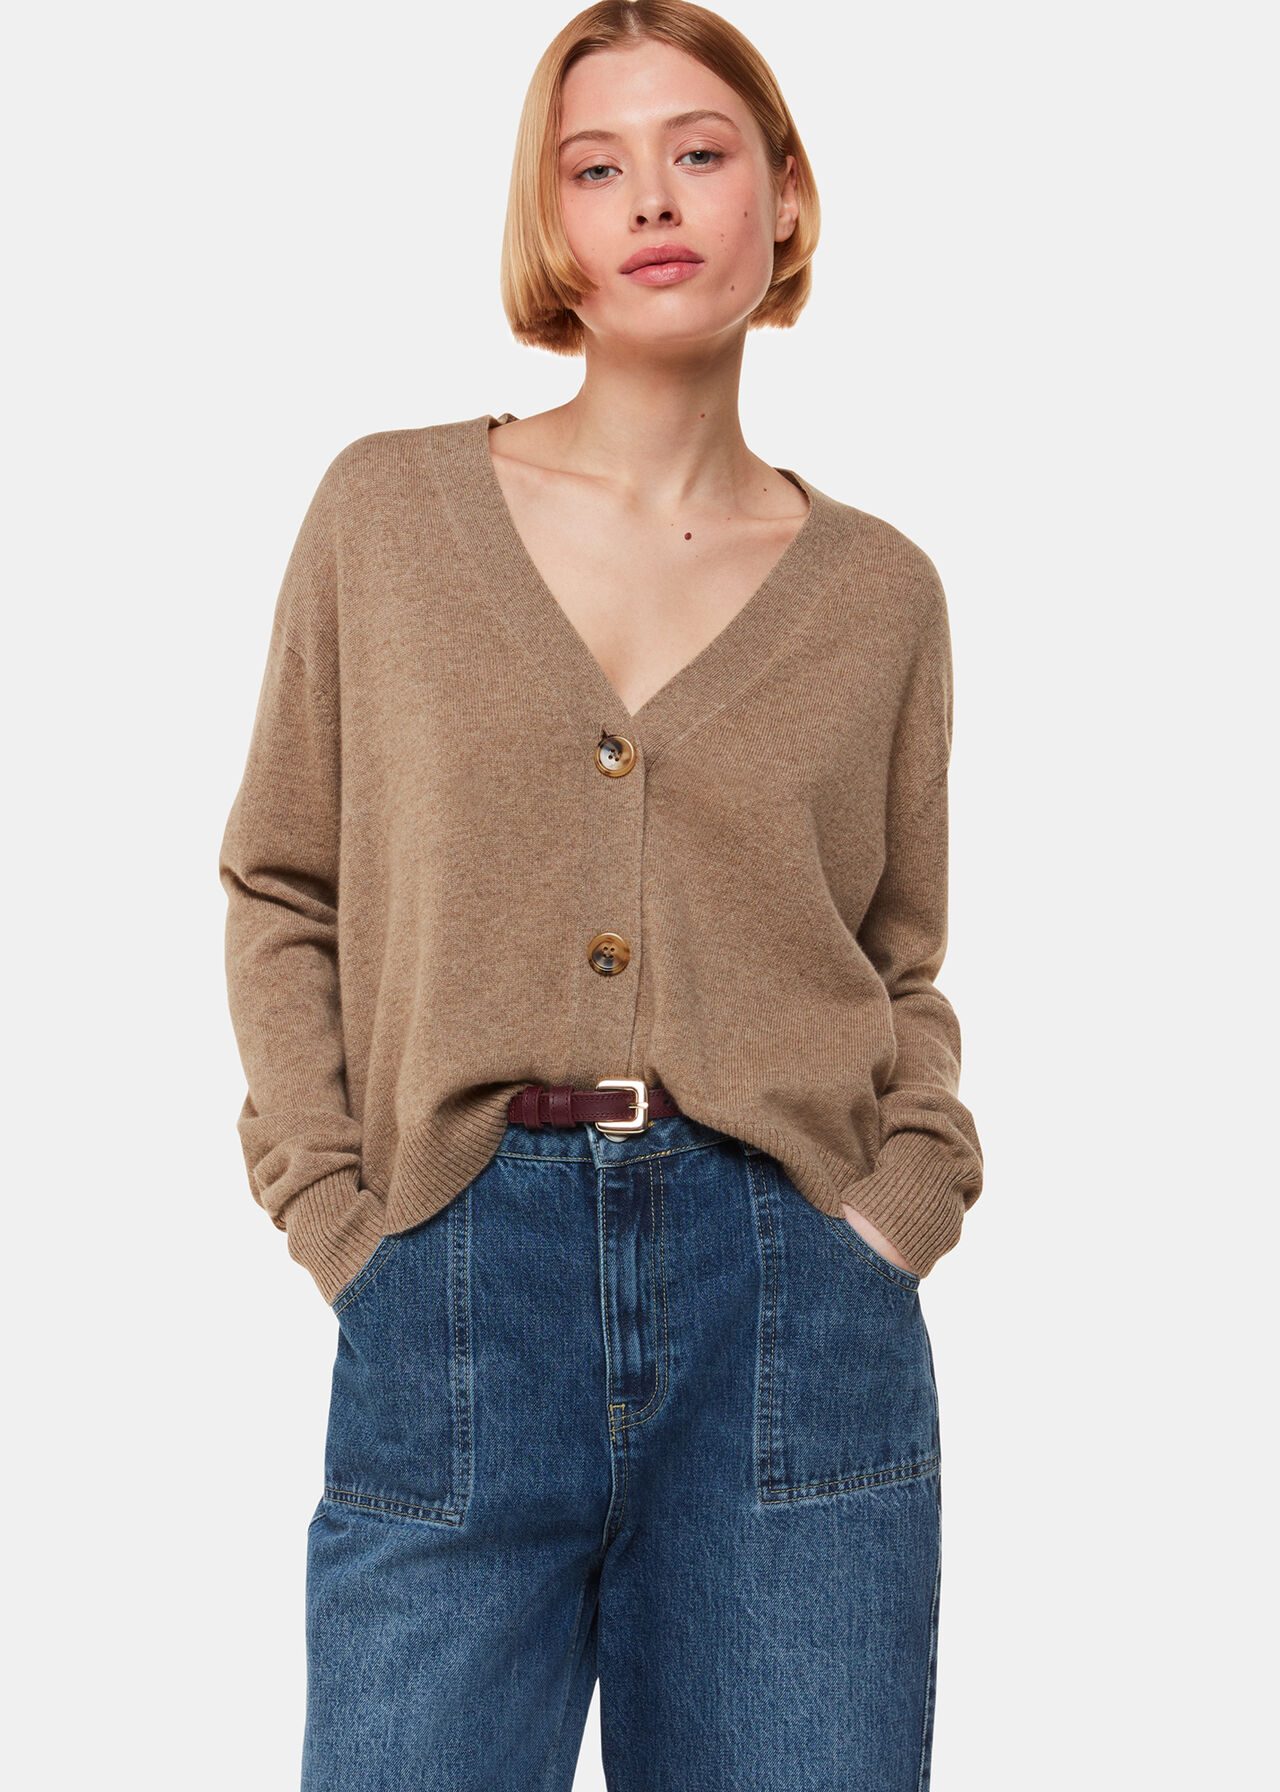 Luxe Cashmere Armstripe Cardigan in Oatmeal